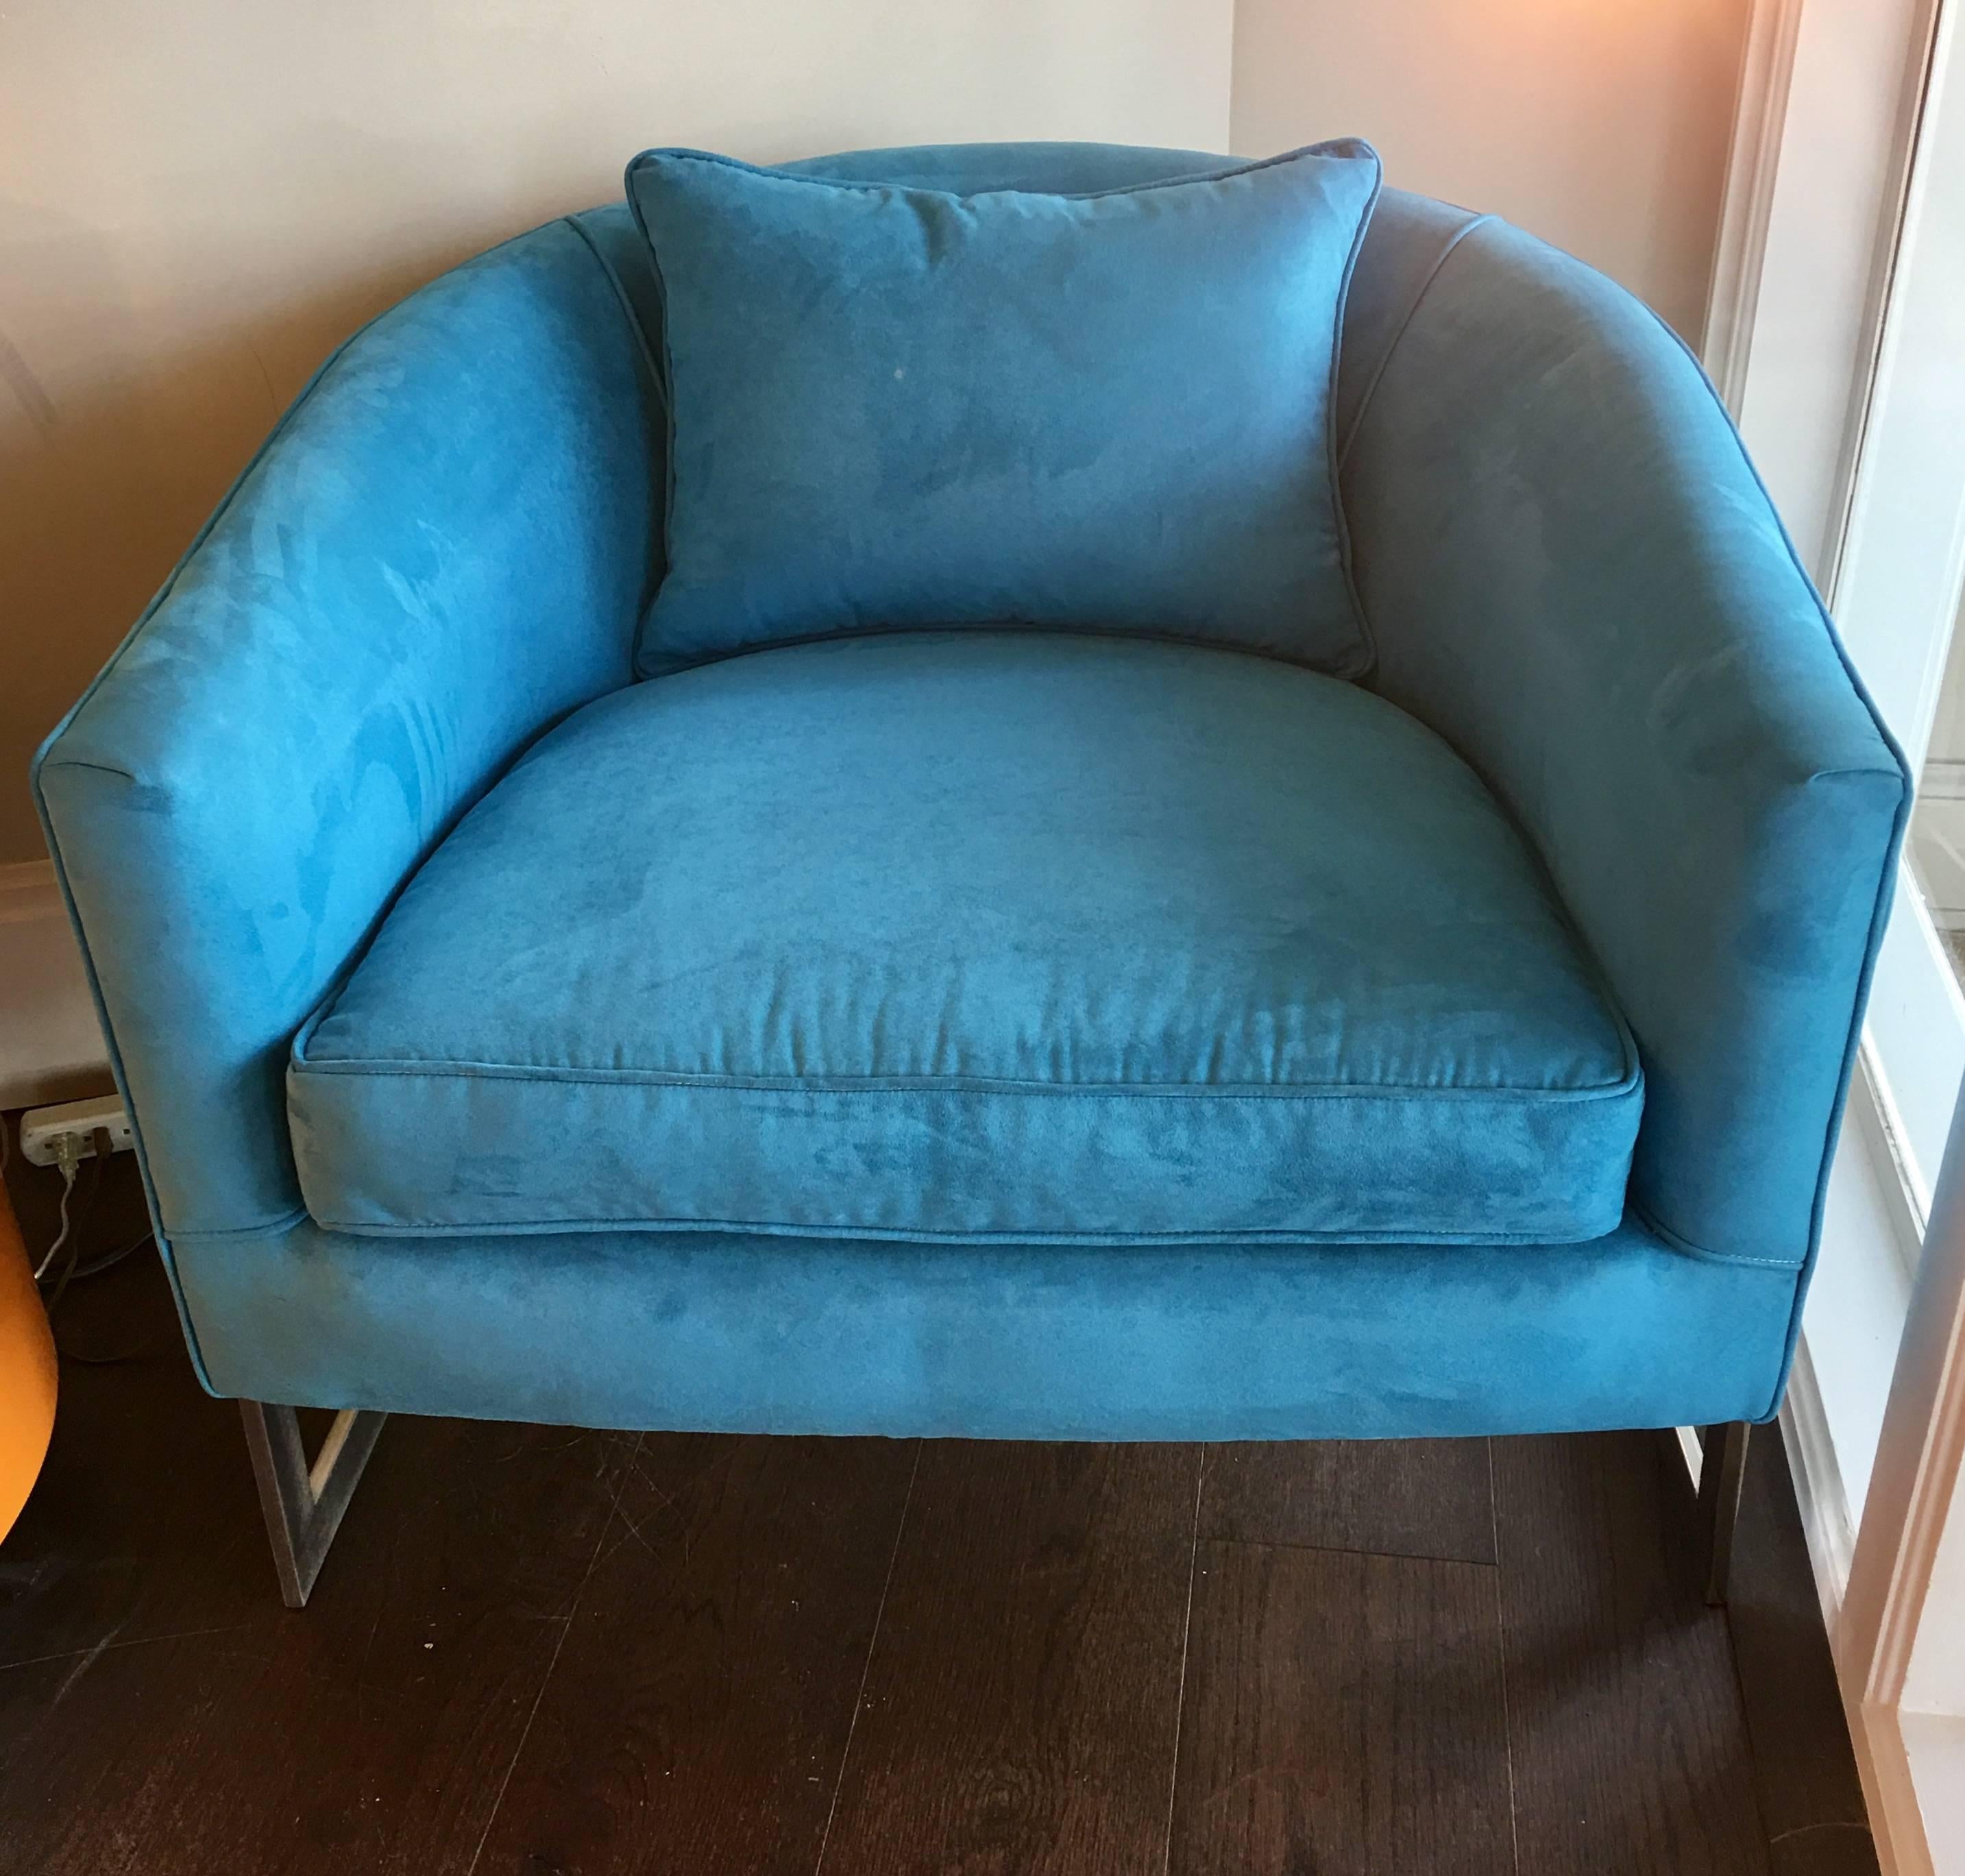 Gorgeous pair of heavy chrome barrel back chairs by Milo Baughman. Newly upholstered with beautiful aqua blue fabric, circa 1970s.